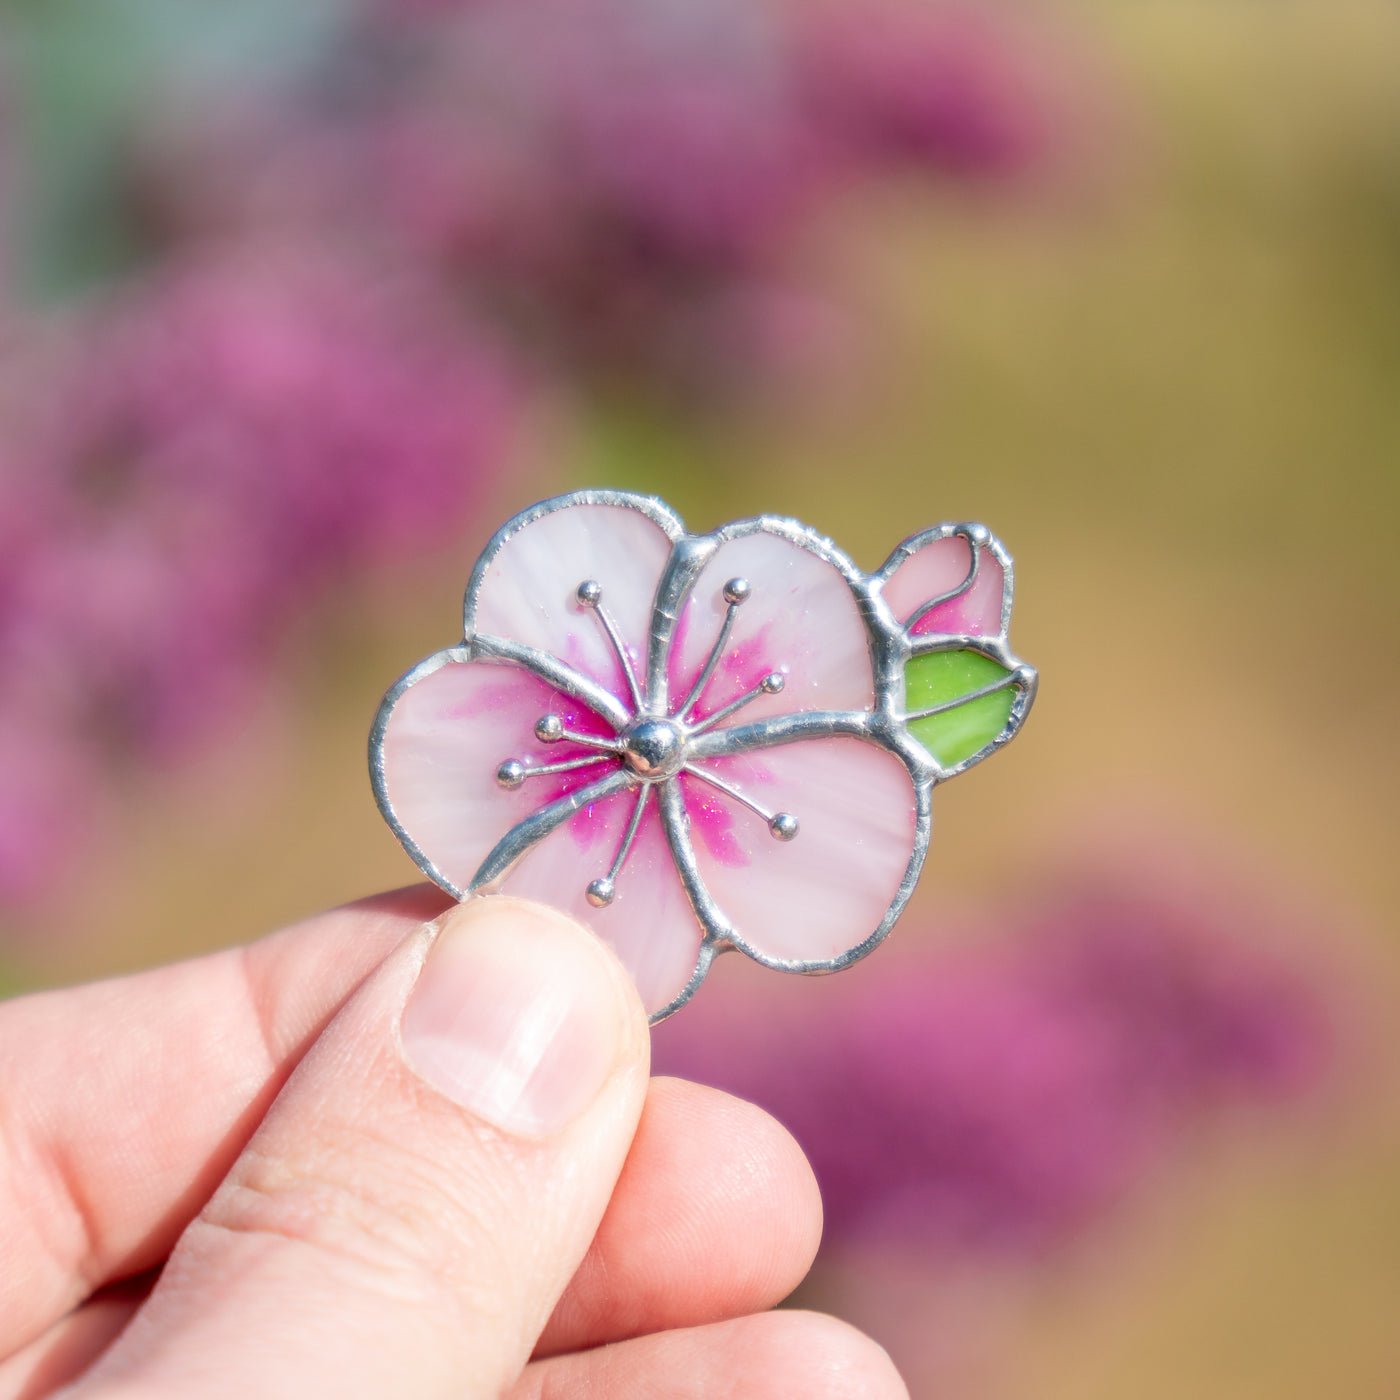 Stained glass apricot blossom flower with a green leaf brooch